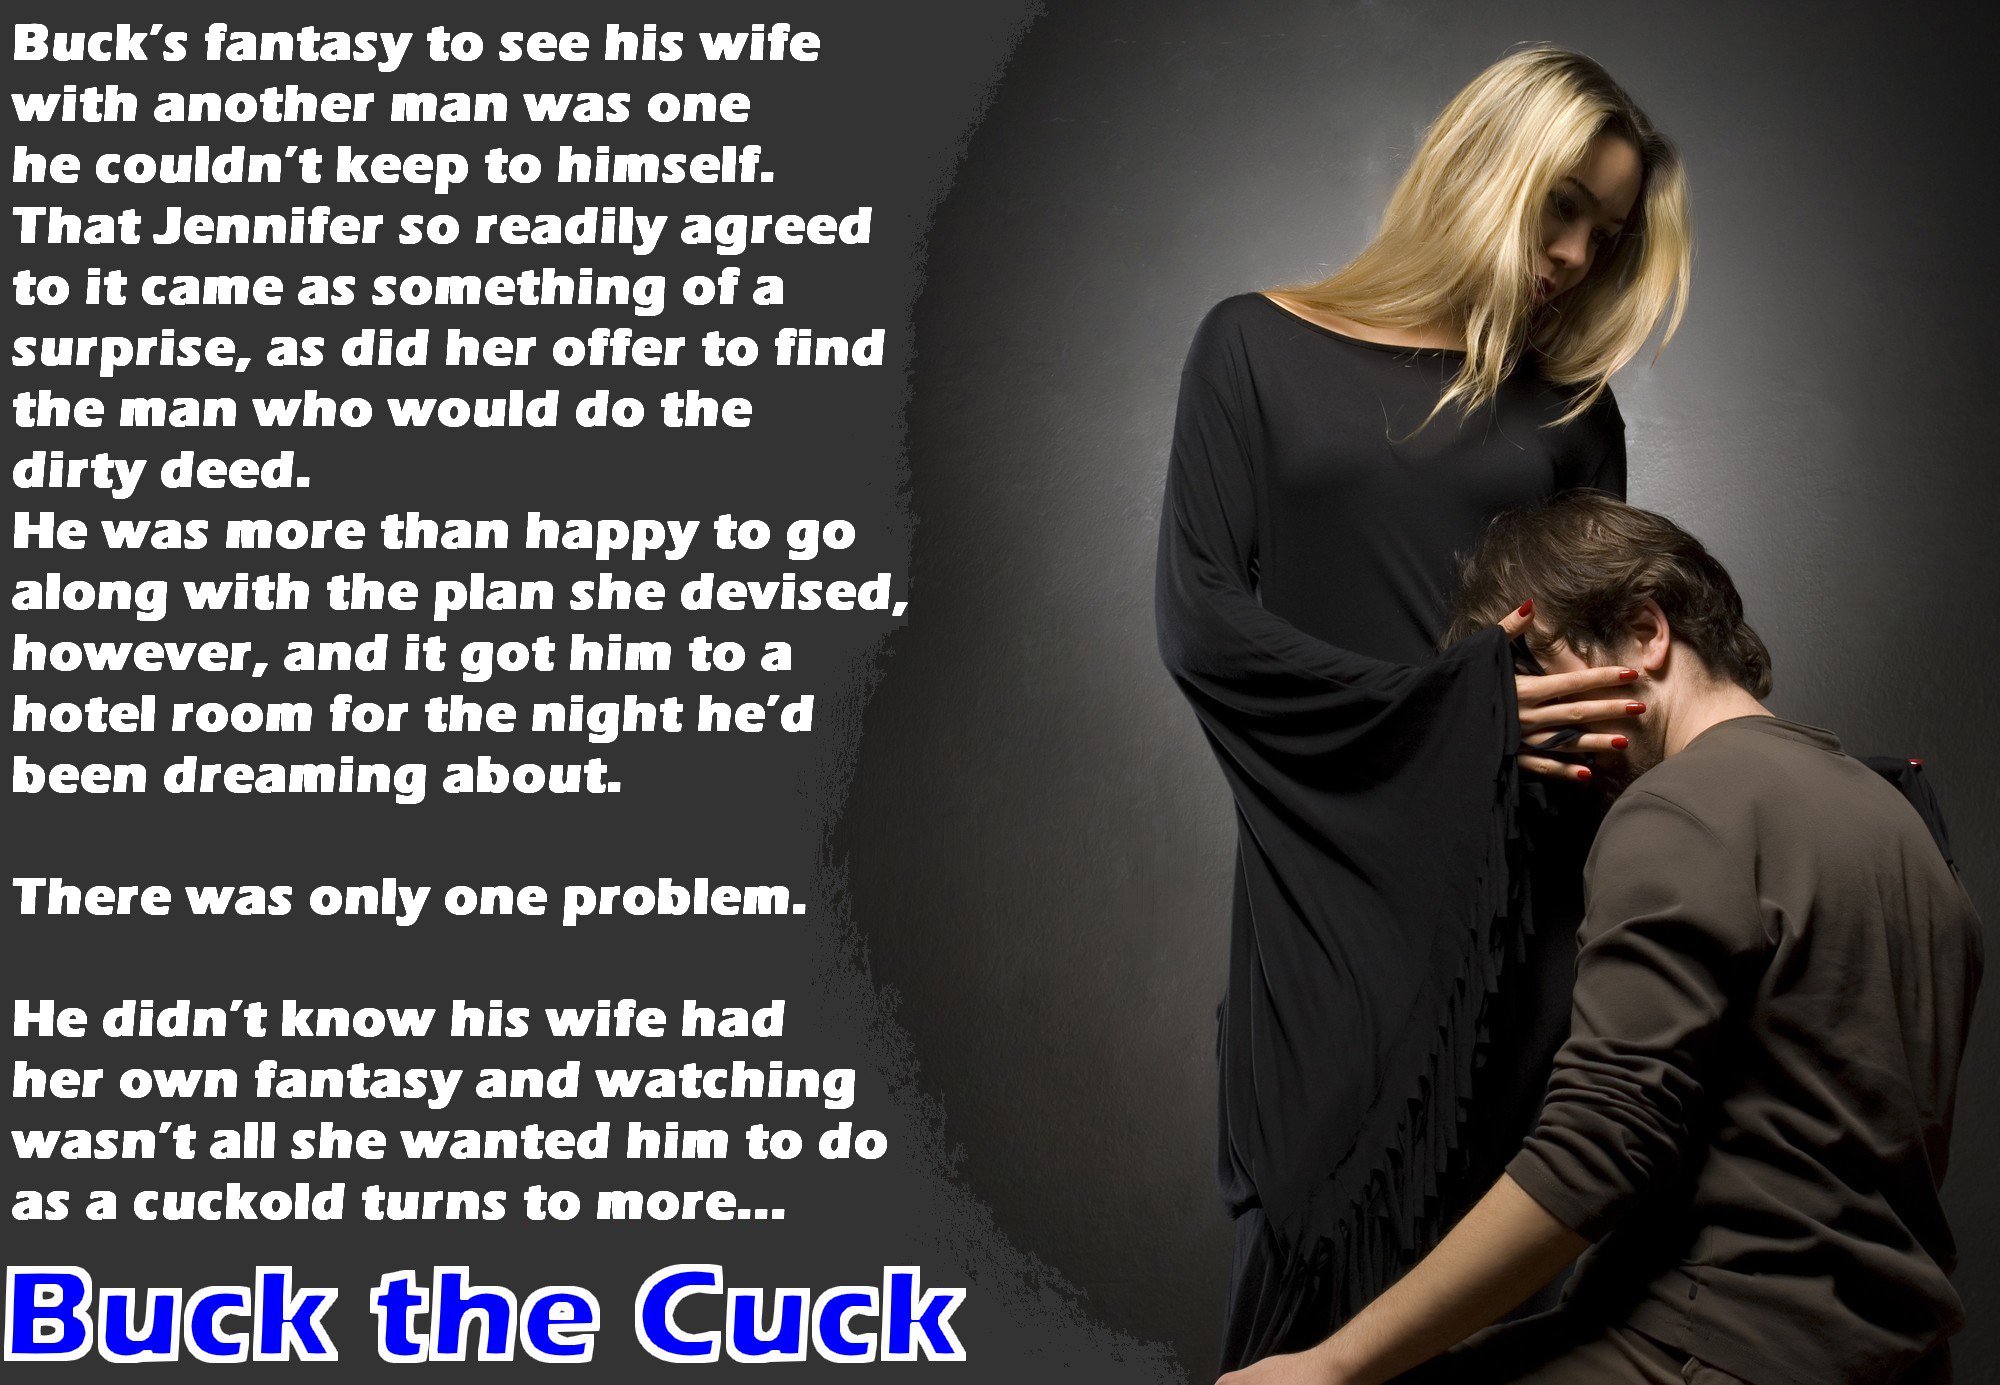 Erotic Fiction on Twitter photo picture